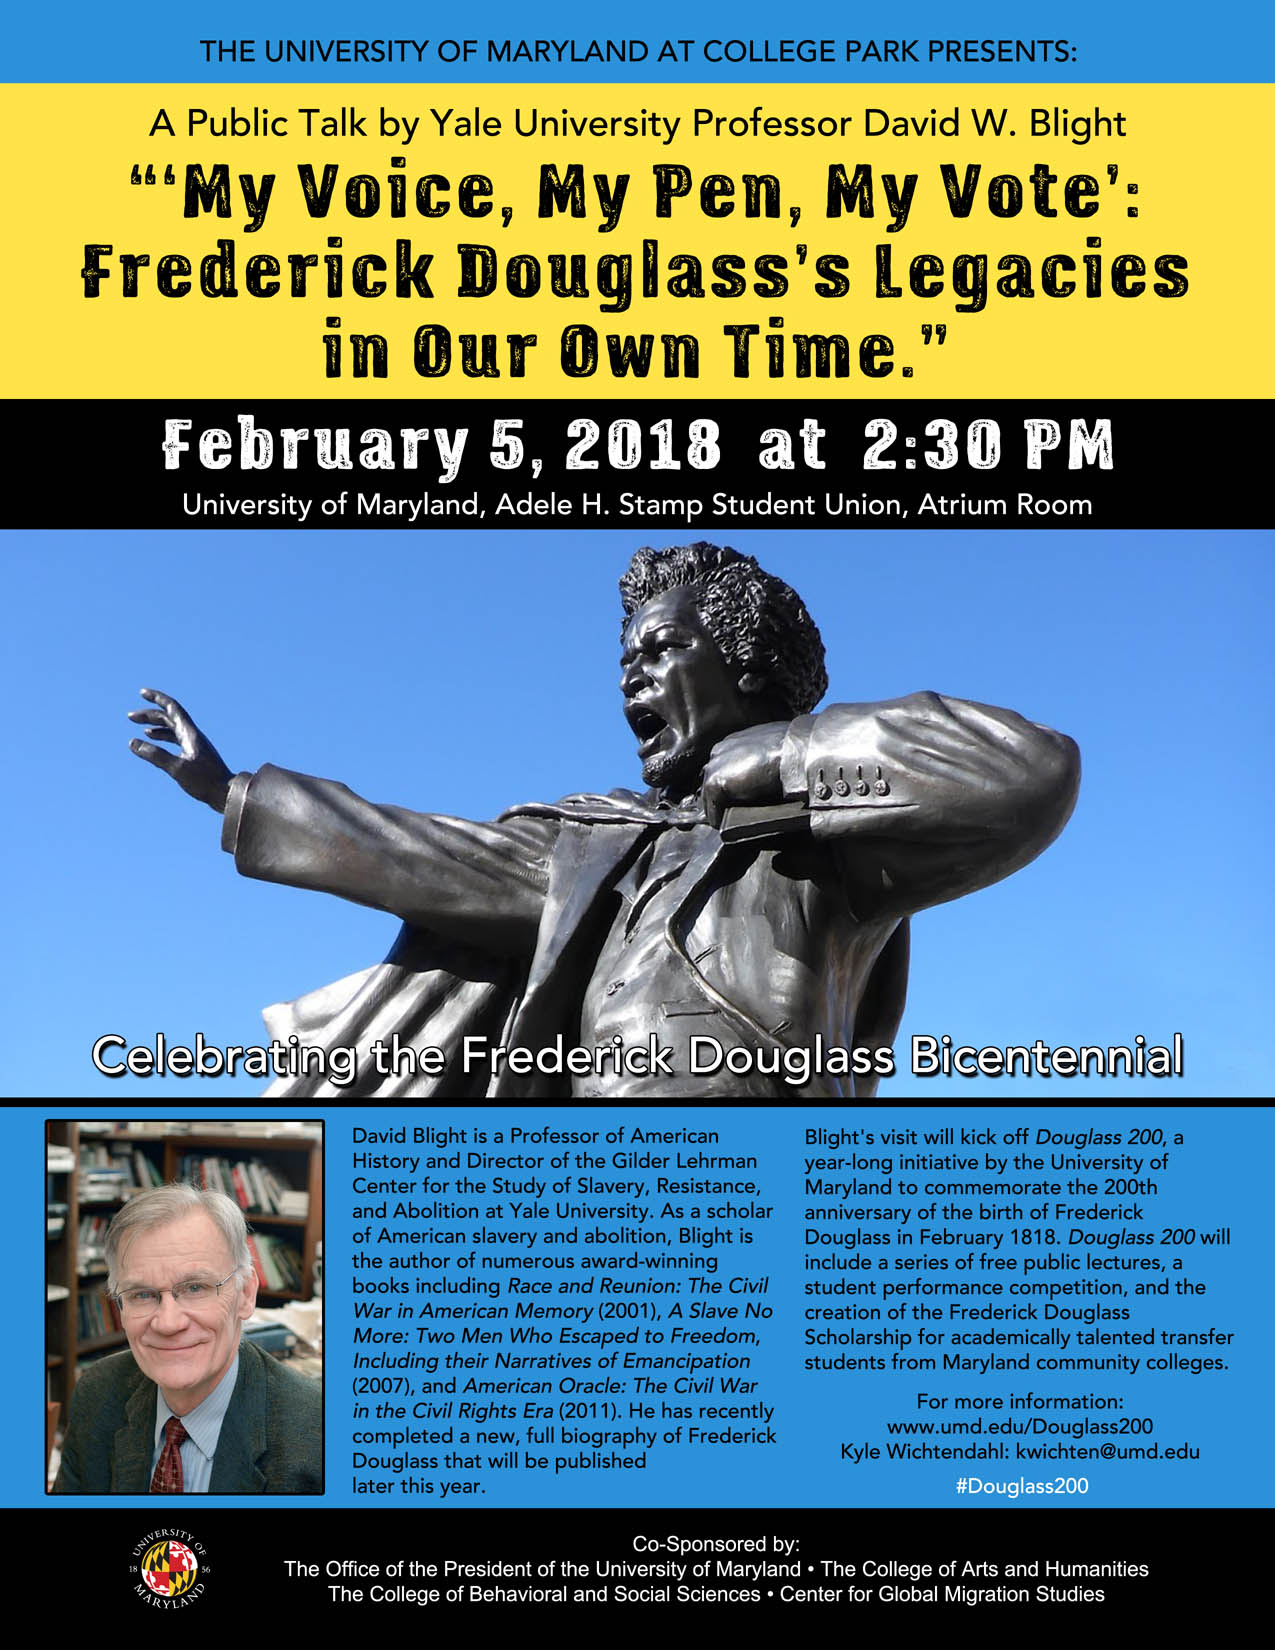 Image for event - Historian David Blight Lecture for Frederick Douglass Bicentennial